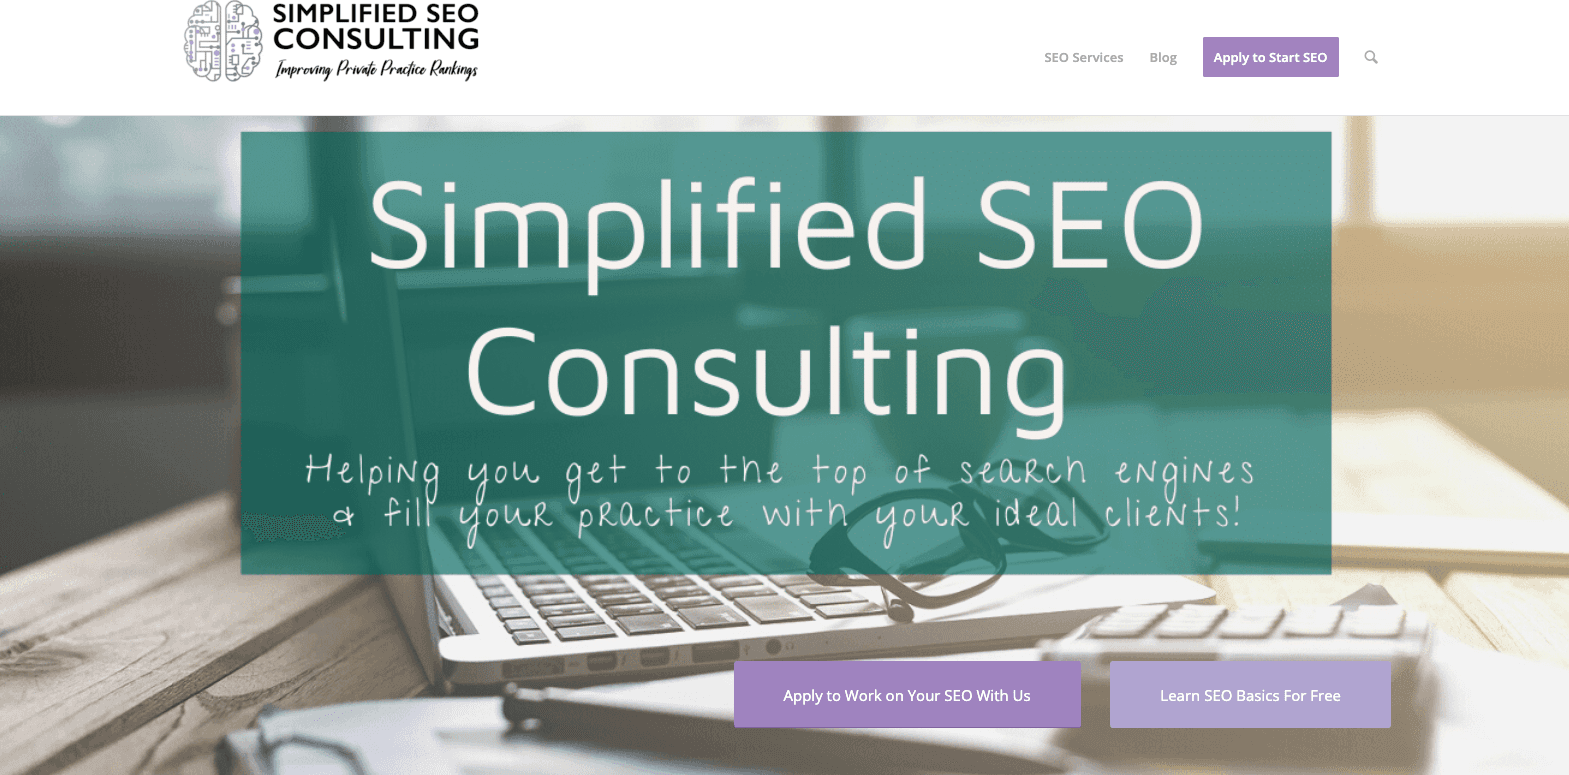 Simplified SEO Consulting Website Homepage